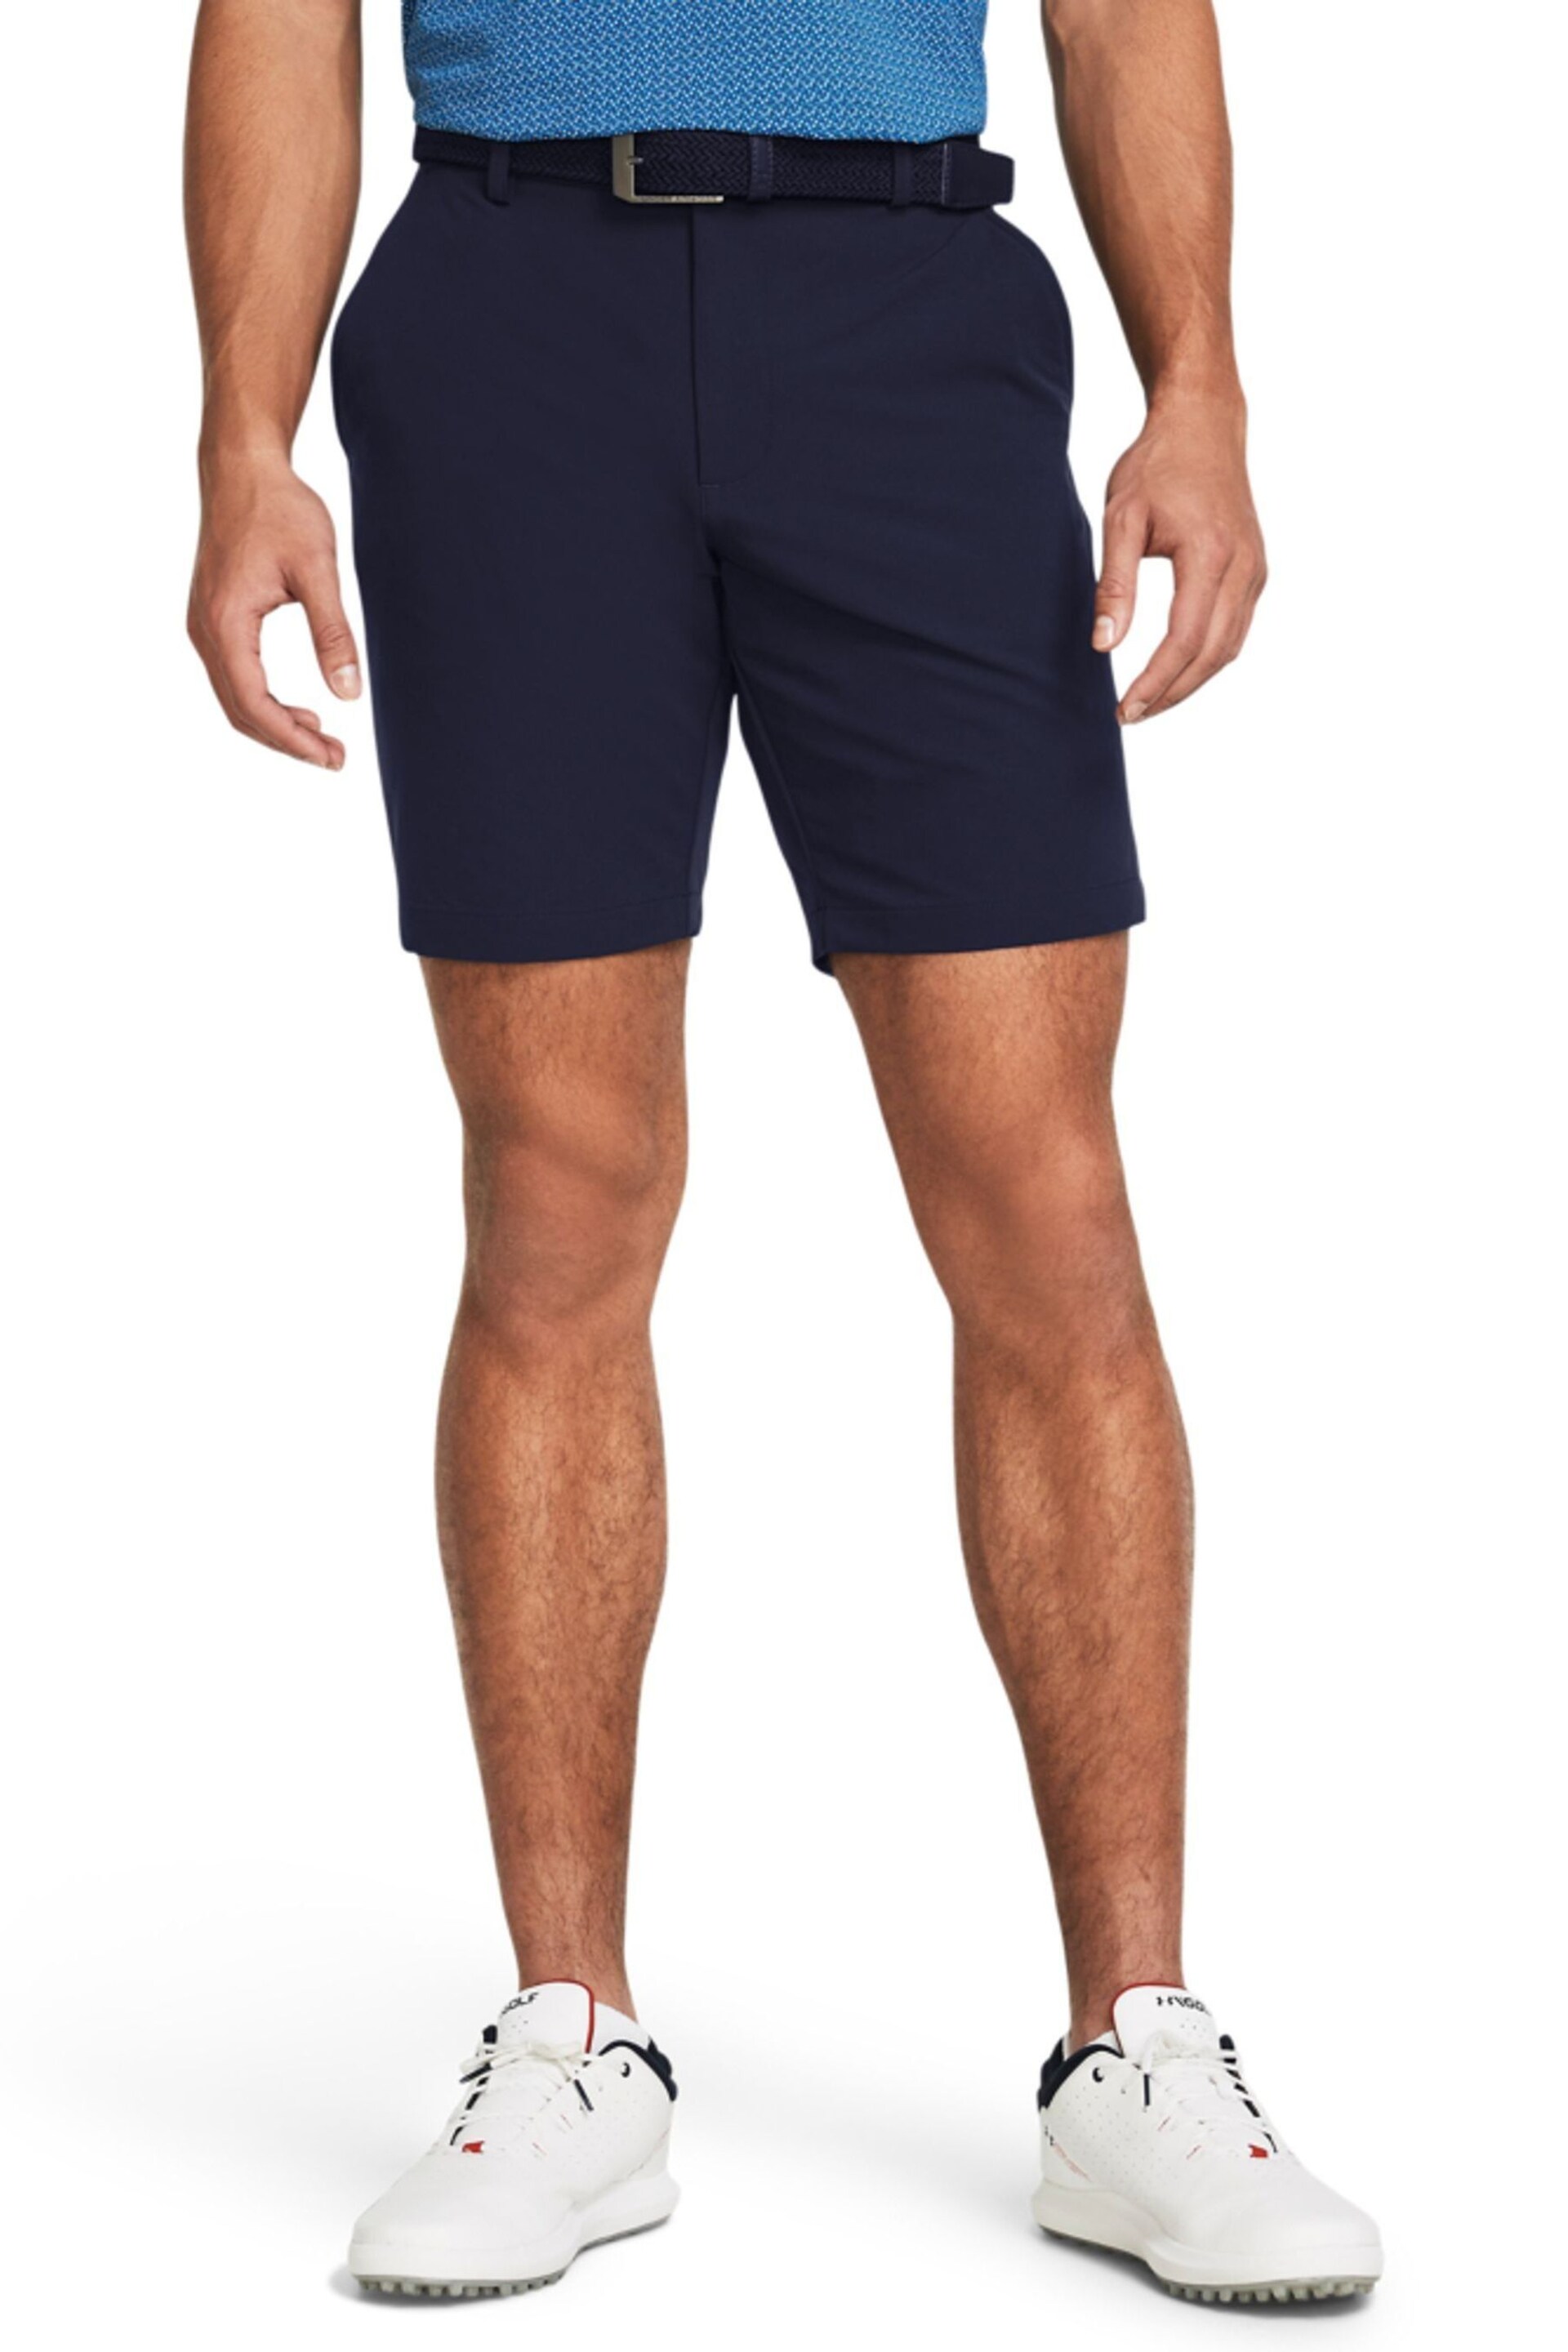 Under Armour Navy Golf Tech Taper Shorts - Image 1 of 5